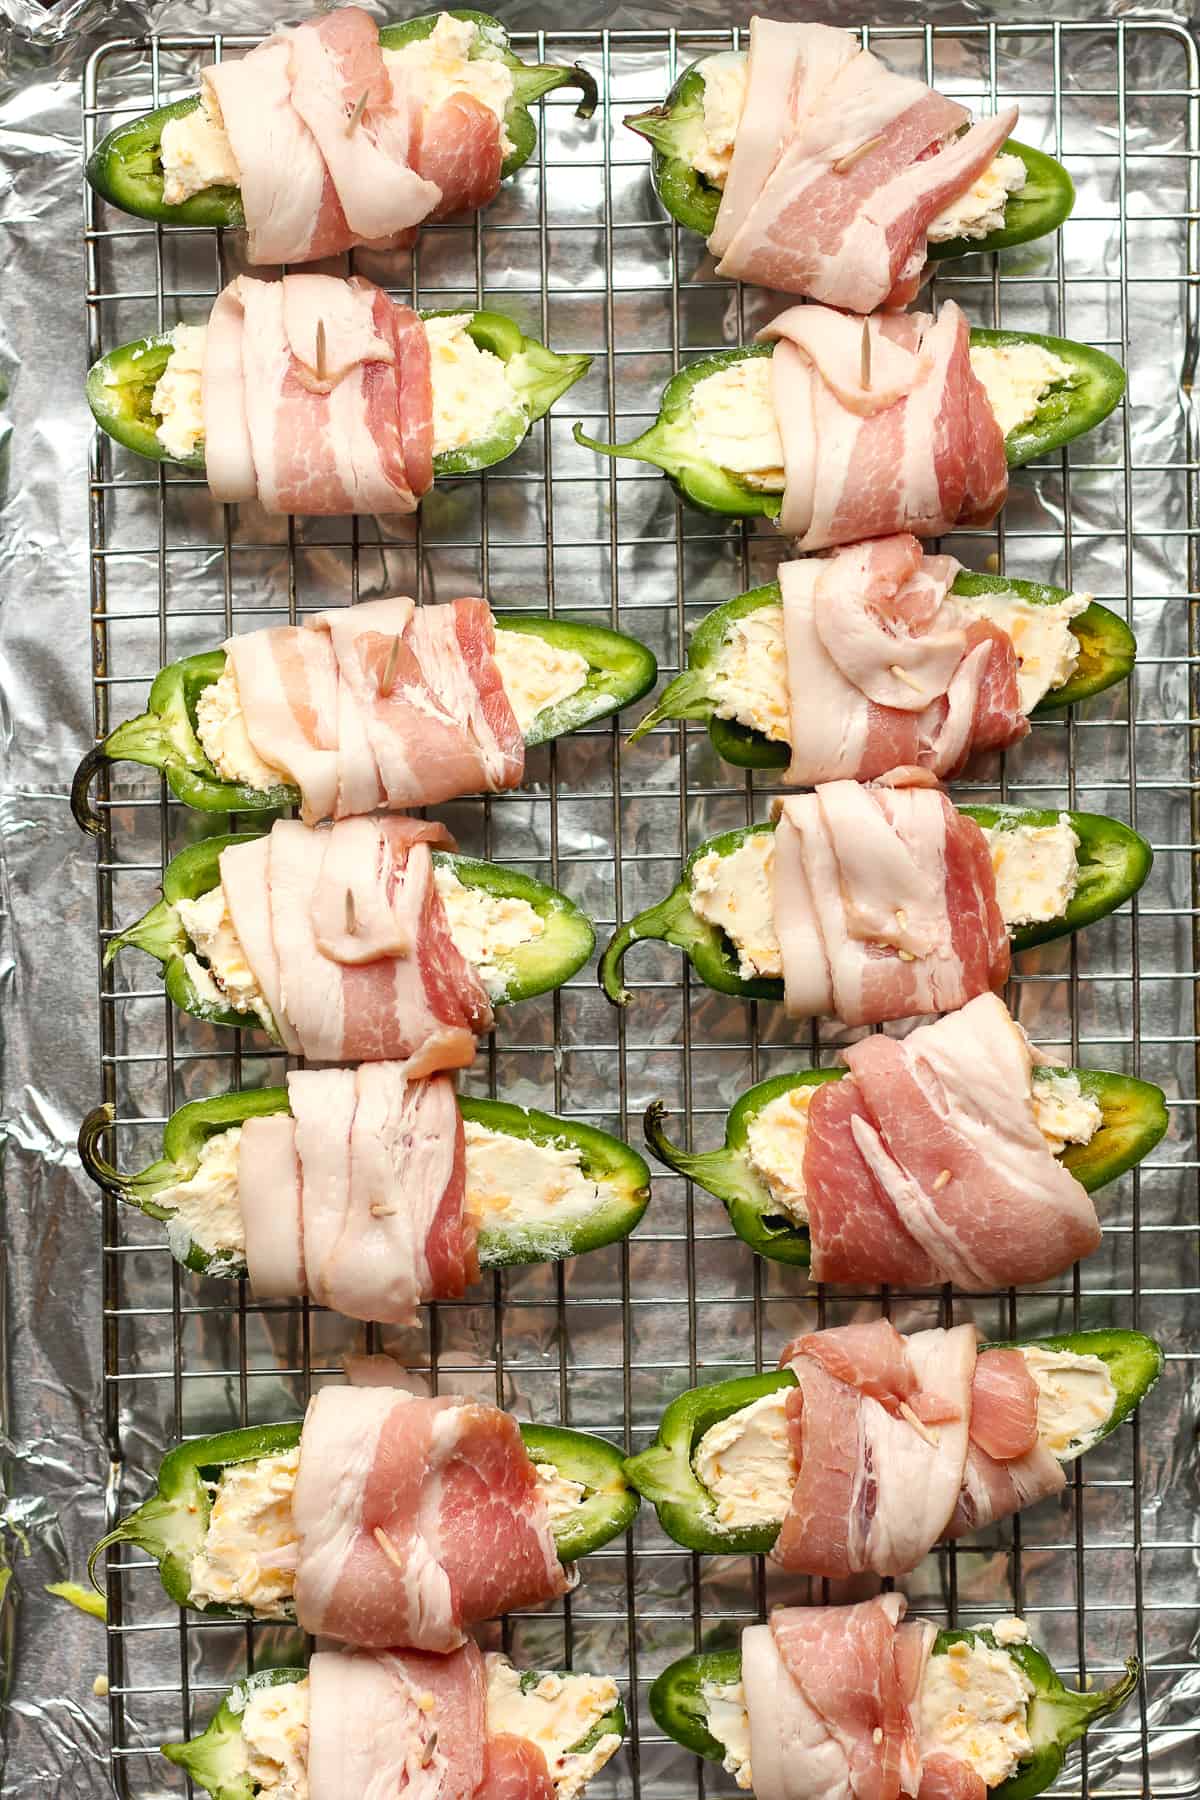 A wire rack of the raw bacon wrapped around stuffed jalapeños.